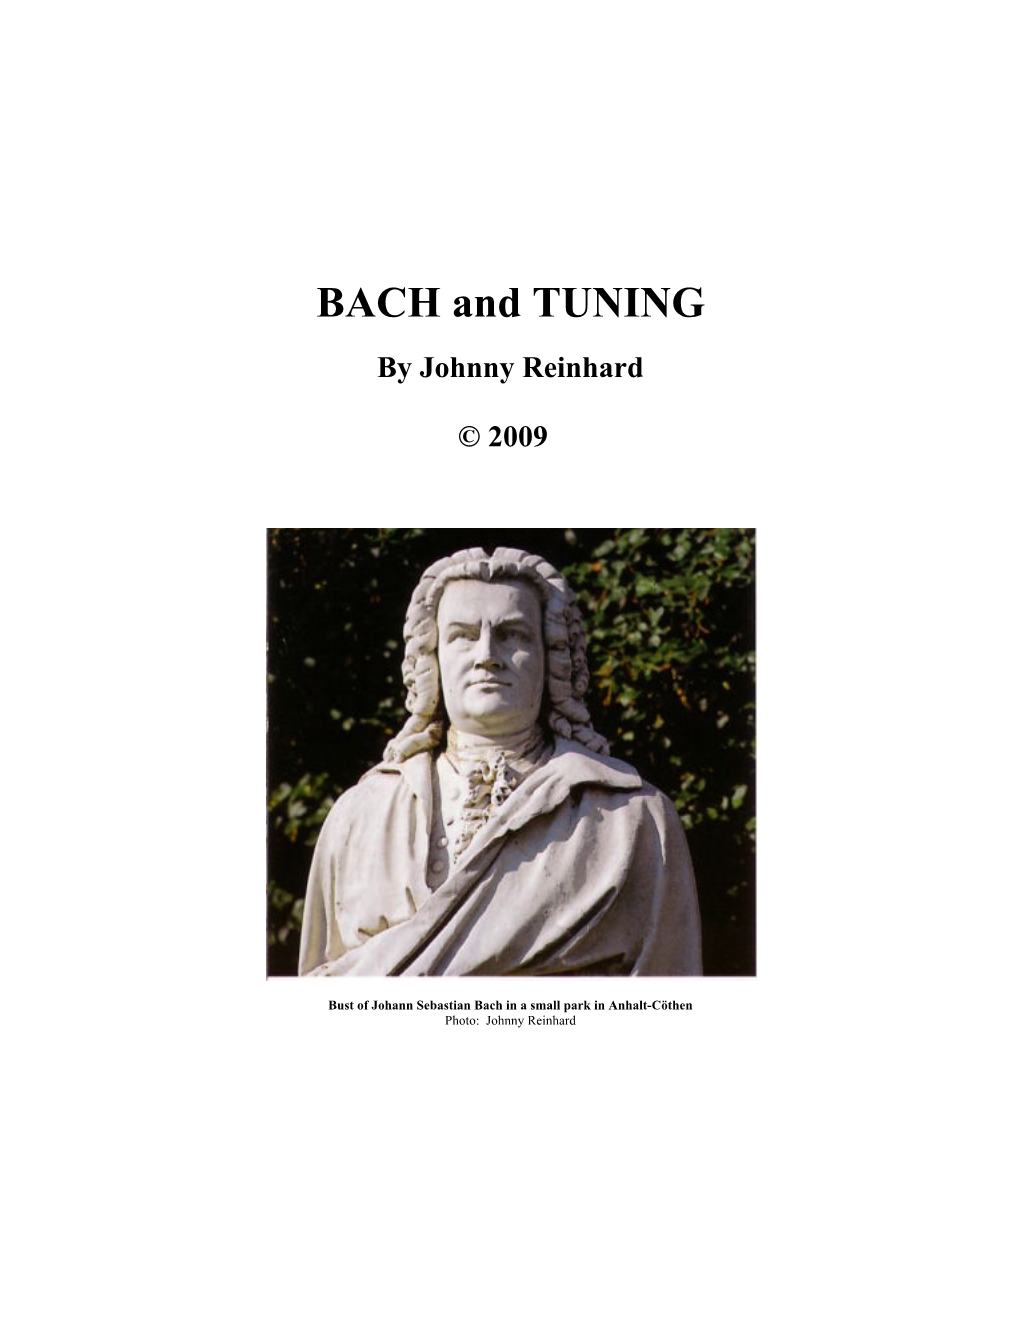 BACH and TUNING by Johnny Reinhard